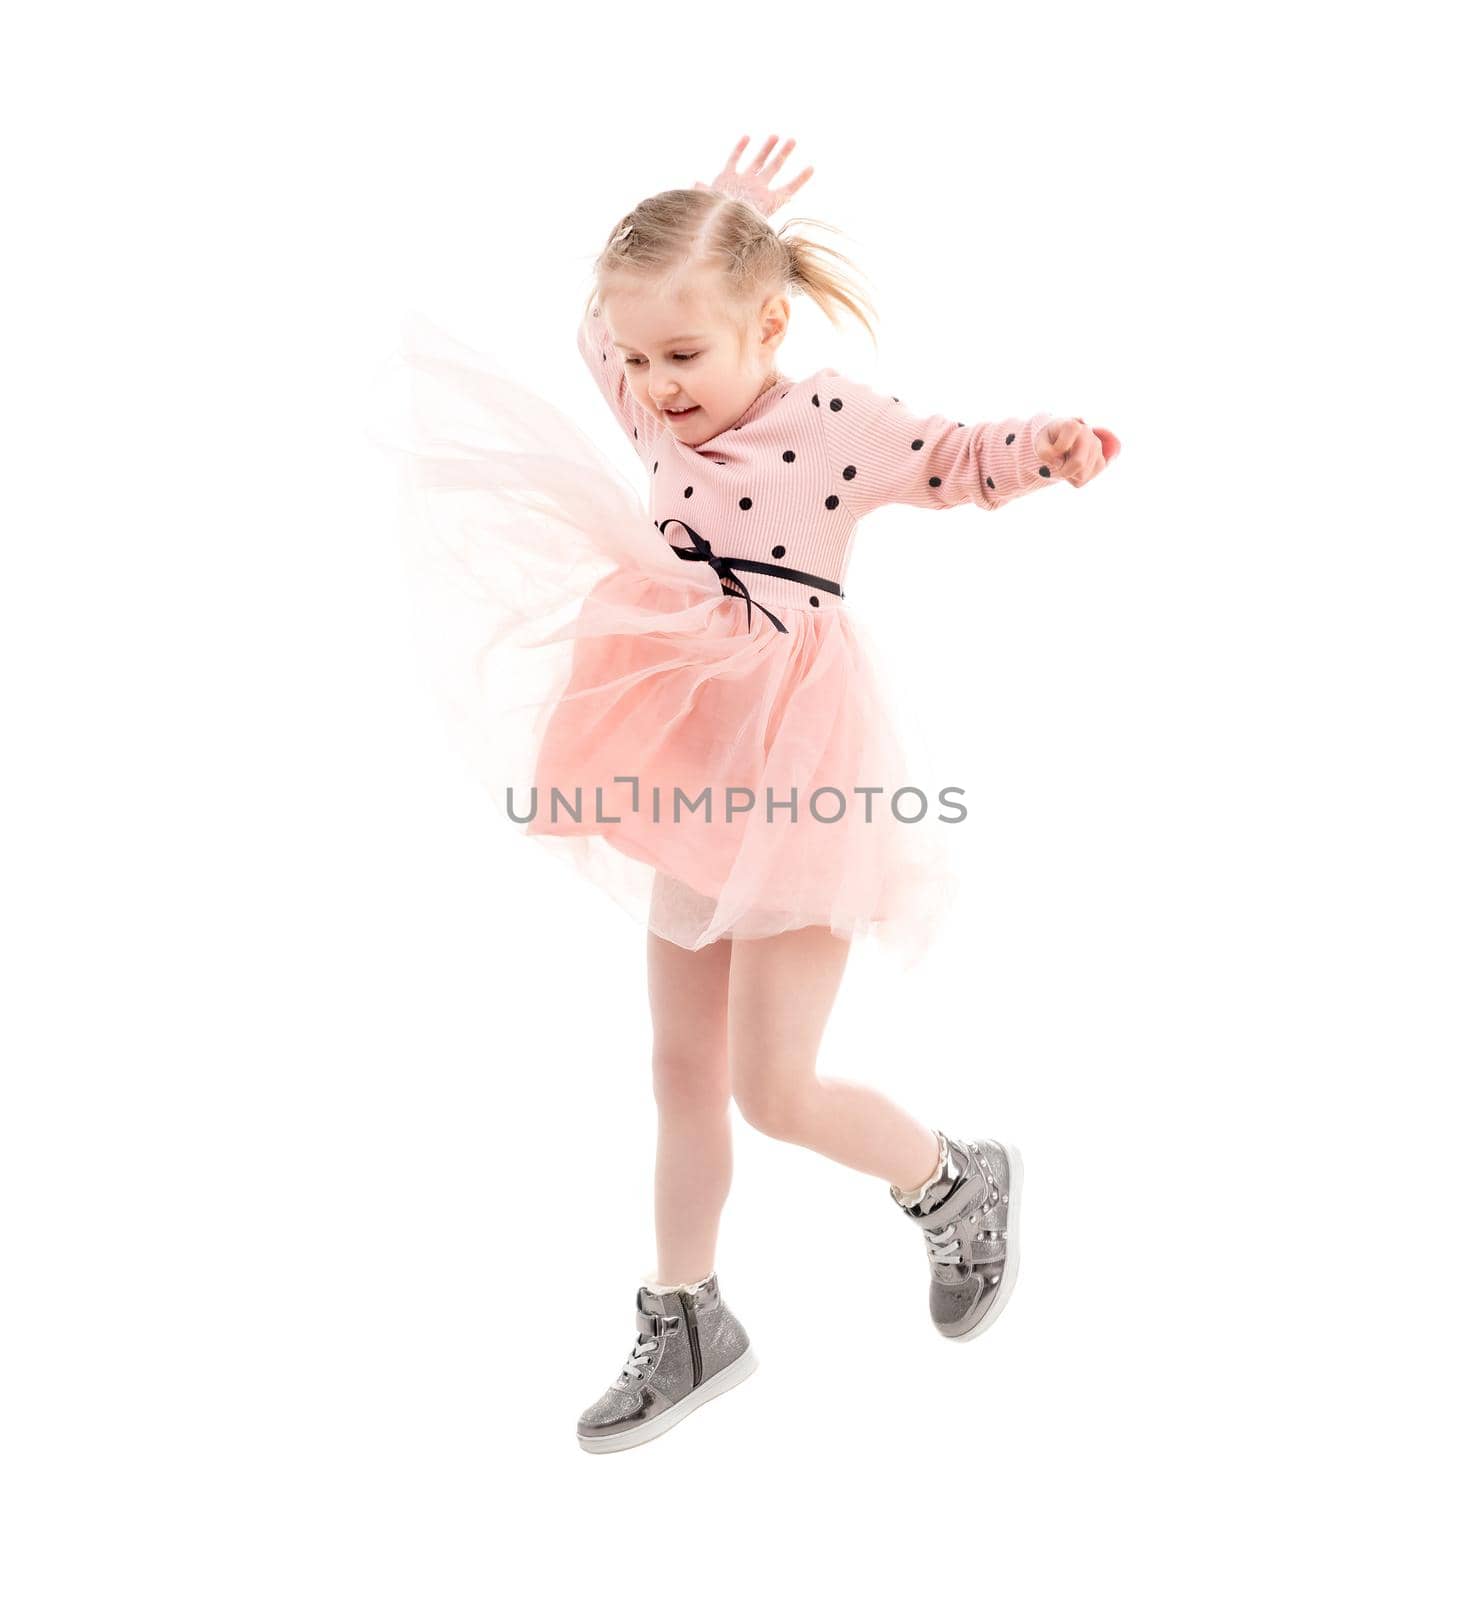 Funny girl jumping high, expressing herself, isolated by tan4ikk1